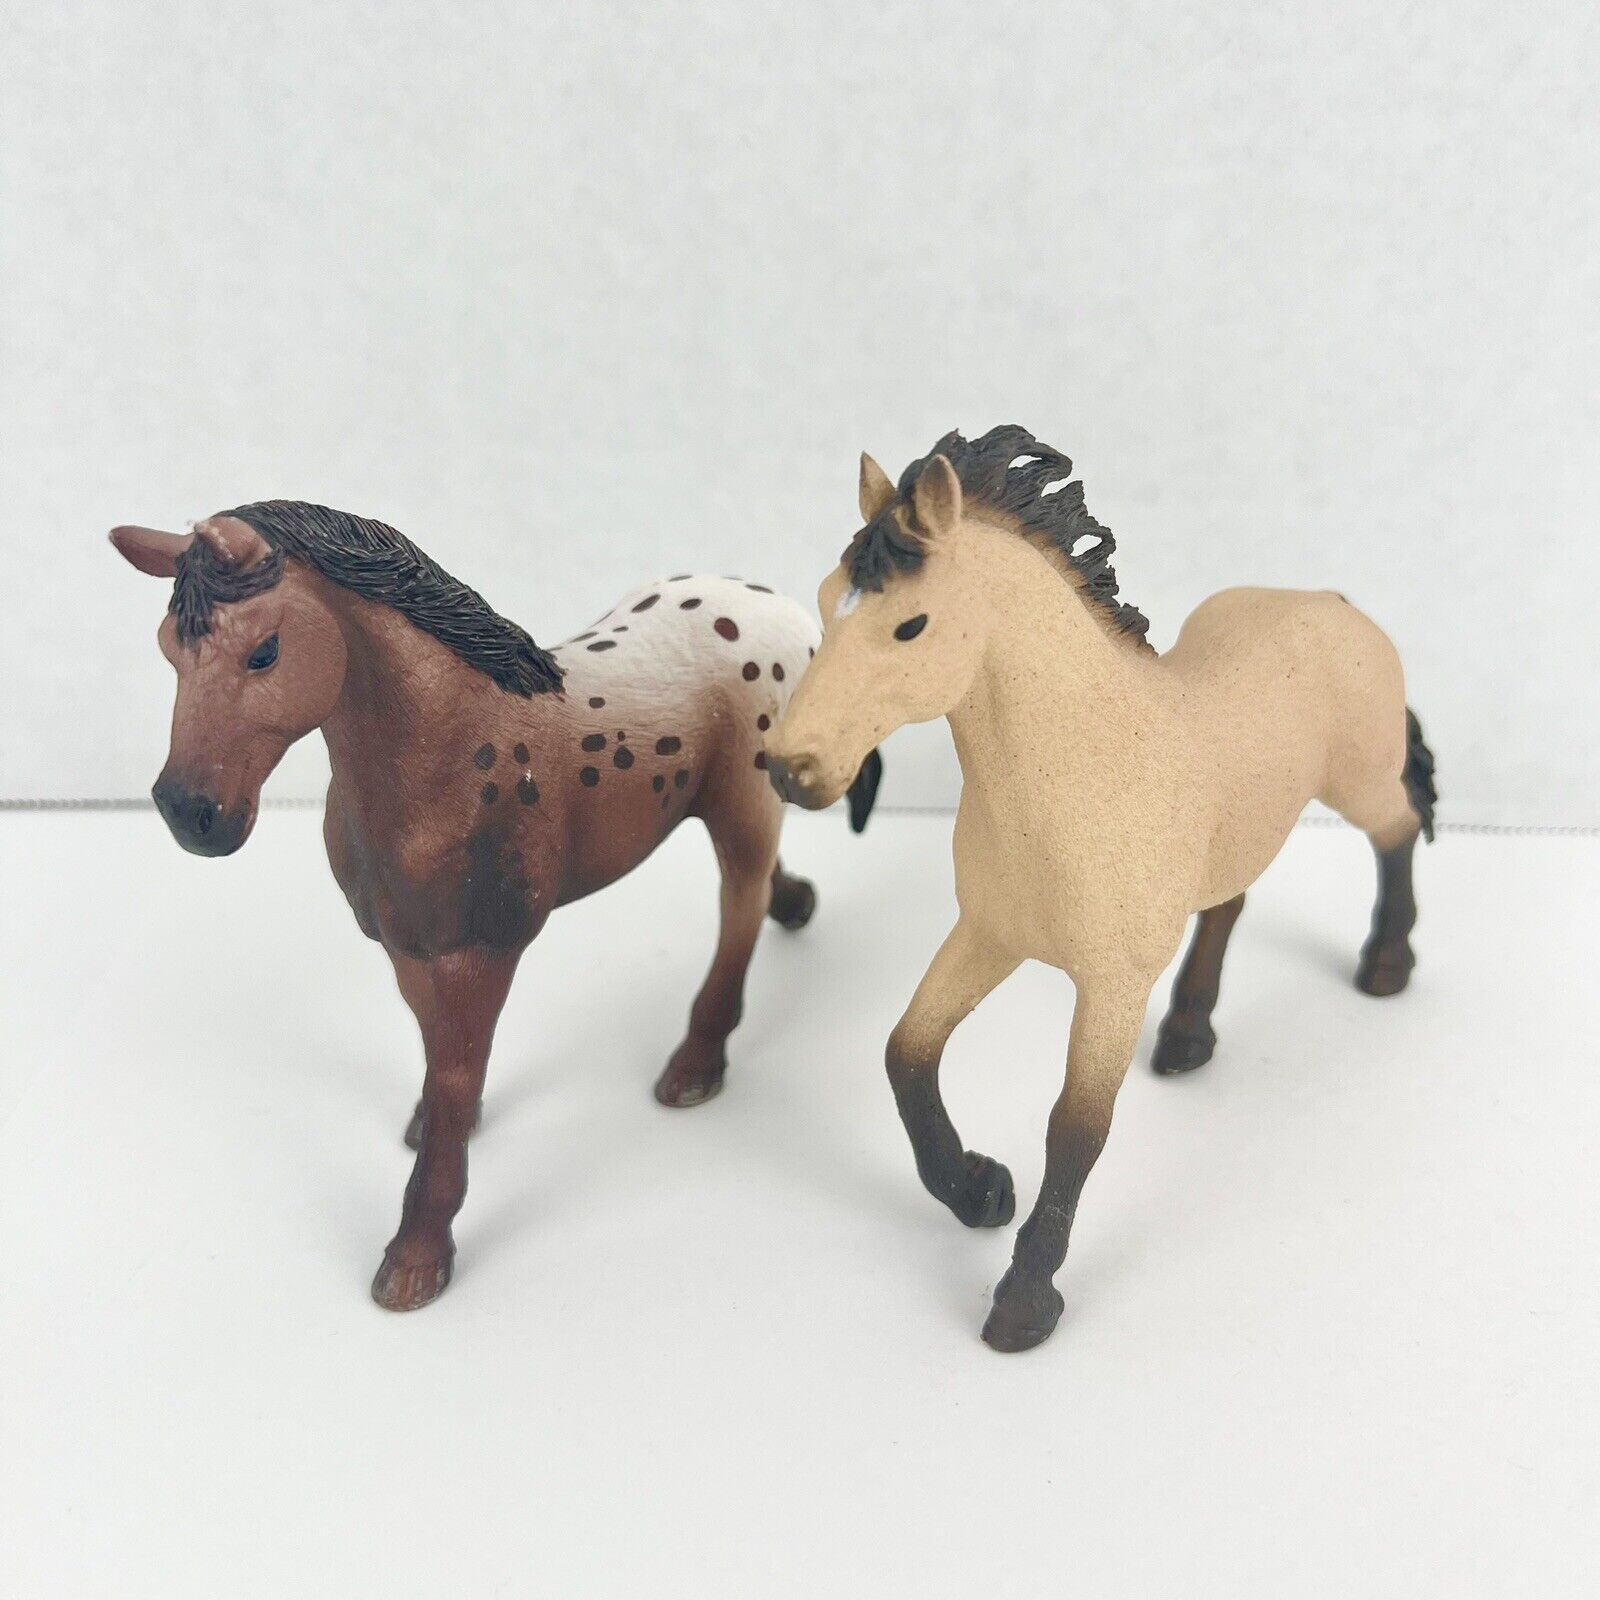 Schleich 2017 Horses Figures Toy Lot of 2 Brown & Beige Horses